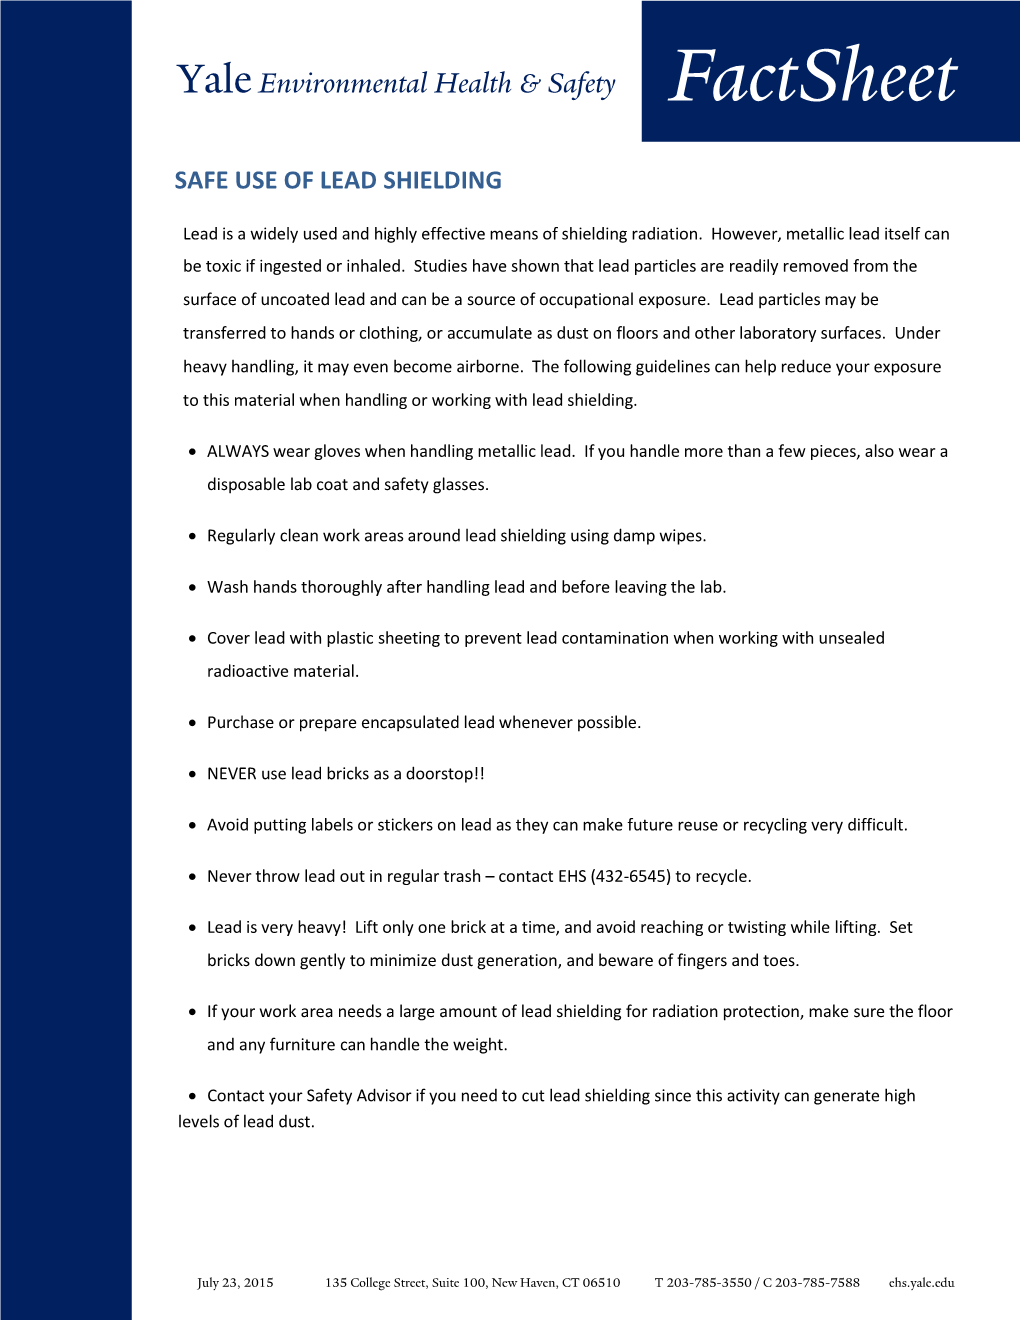 Lead Shielding Safety Guidelines